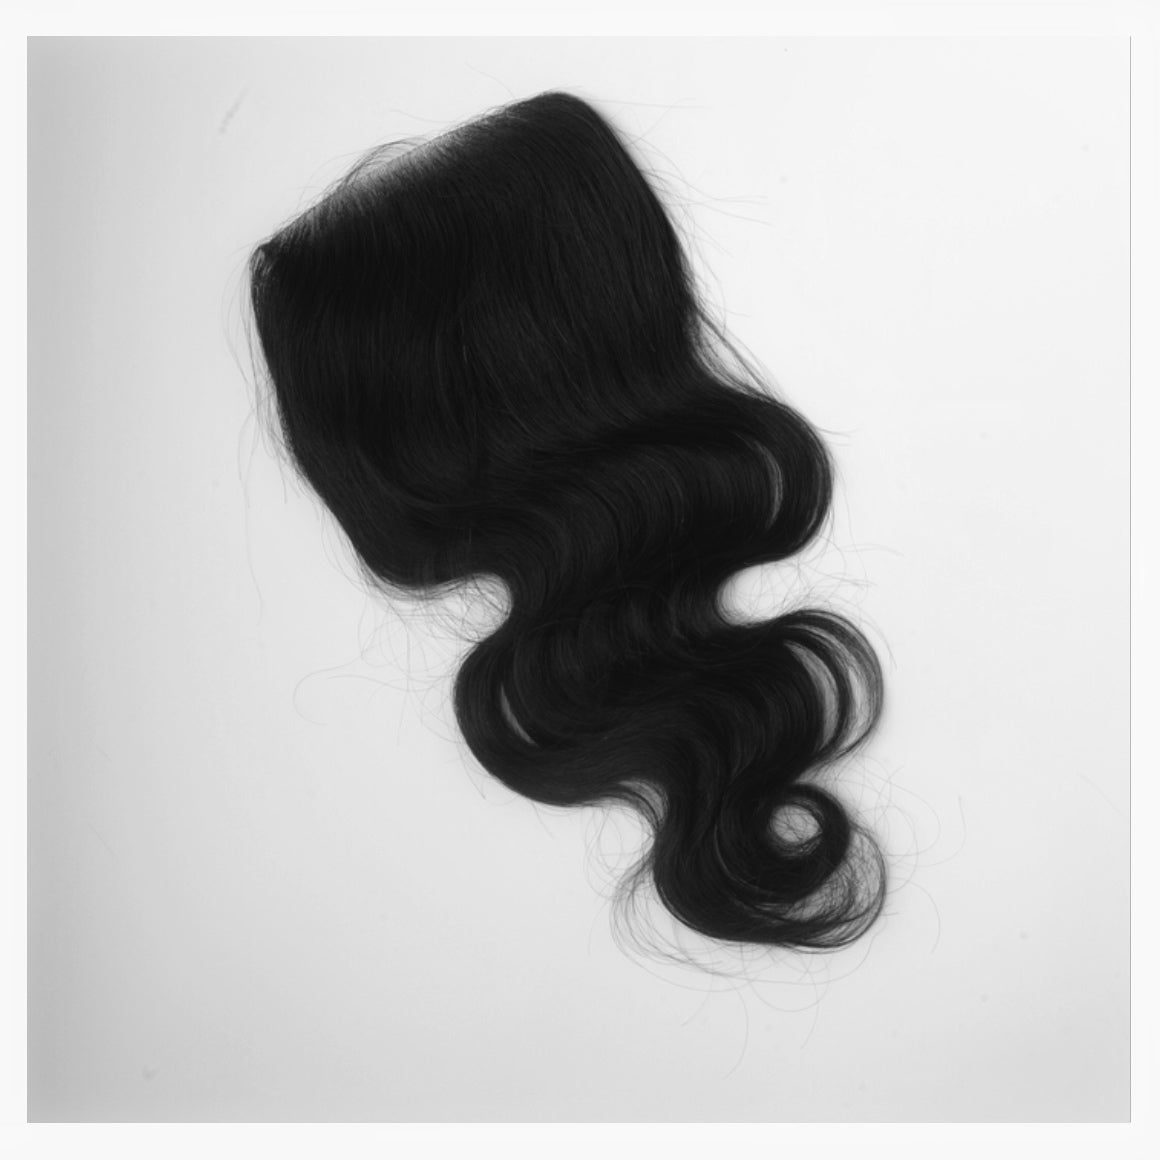 We are well known for our 4 X 4 lace closures. Available in a wavy texture in lengths 12, 14, 16, 18 inches.